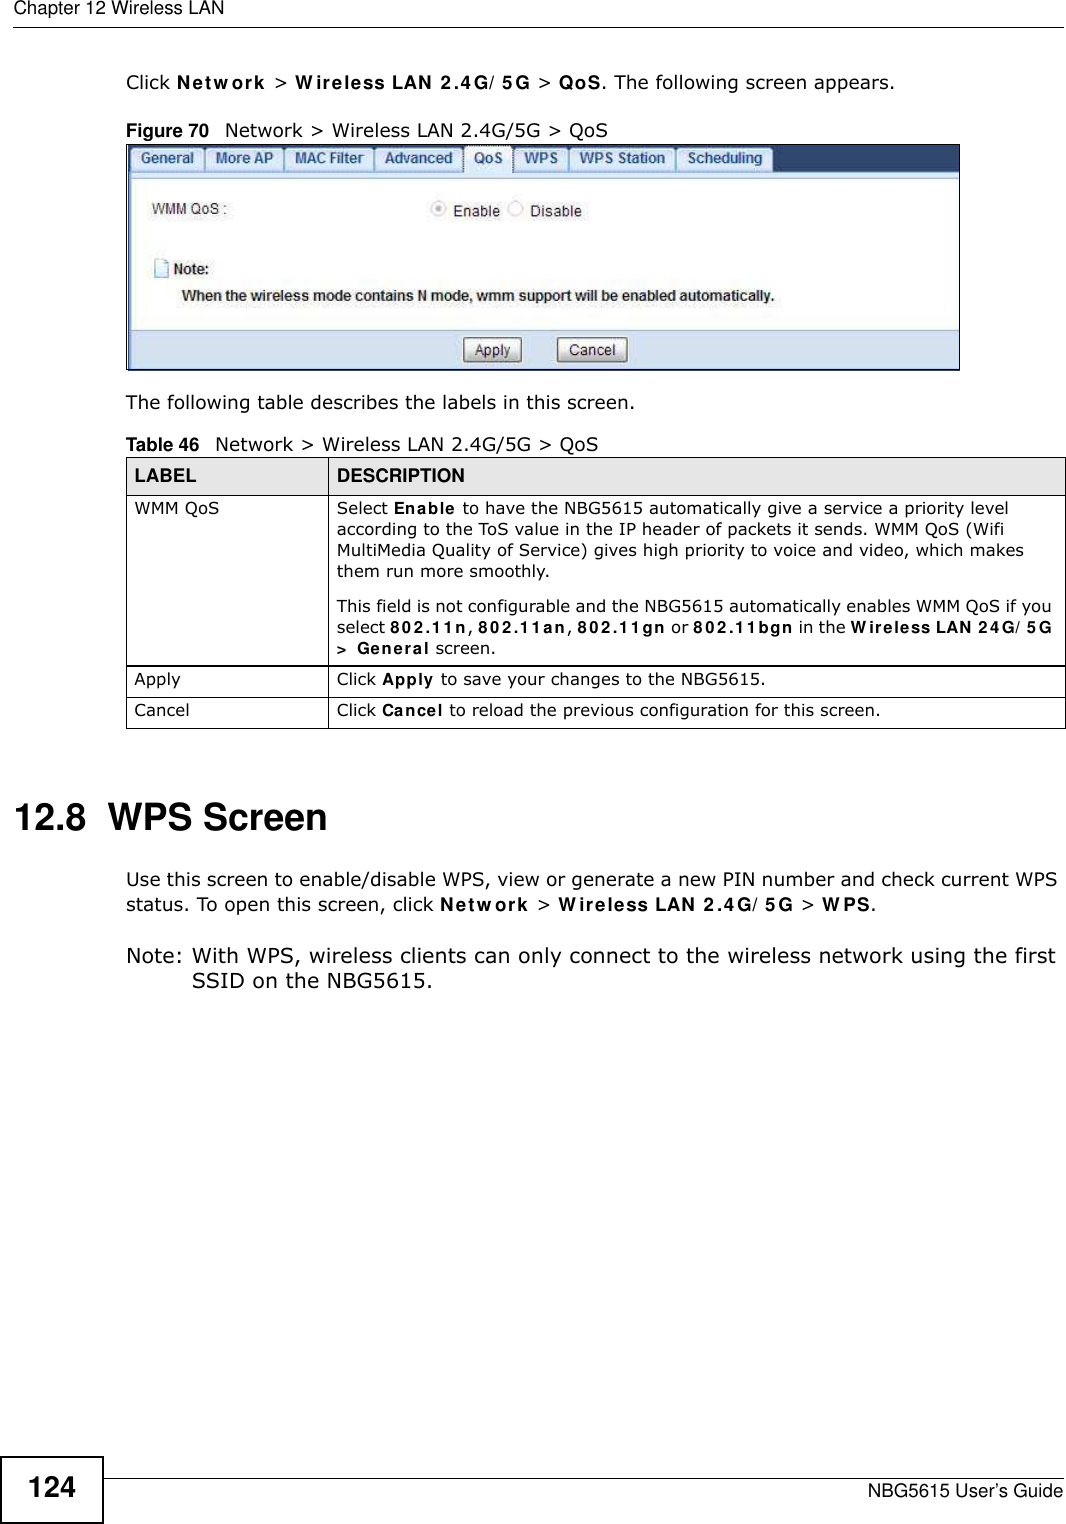 Chapter 12 Wireless LANNBG5615 User’s Guide124Click Netw ork &gt; W ireless LAN 2 .4 G/ 5 G &gt; QoS. The following screen appears.Figure 70   Network &gt; Wireless LAN 2.4G/5G &gt; QoS The following table describes the labels in this screen. 12.8  WPS ScreenUse this screen to enable/disable WPS, view or generate a new PIN number and check current WPS status. To open this screen, click Netw ork &gt; W ireless LAN 2.4G/ 5G &gt; W PS.Note: With WPS, wireless clients can only connect to the wireless network using the first SSID on the NBG5615.Table 46   Network &gt; Wireless LAN 2.4G/5G &gt; QoSLABEL DESCRIPTIONWMM QoS Select Enable to have the NBG5615 automatically give a service a priority level according to the ToS value in the IP header of packets it sends. WMM QoS (Wifi MultiMedia Quality of Service) gives high priority to voice and video, which makes them run more smoothly.This field is not configurable and the NBG5615 automatically enables WMM QoS if you select 802 .1 1n, 8 0 2 .1 1 a n, 8 02 .11 gn or 8 02.1 1bgn in the W ireless LAN 24 G/ 5G &gt;  General screen.Apply Click Apply to save your changes to the NBG5615.Cancel Click Cancel to reload the previous configuration for this screen.